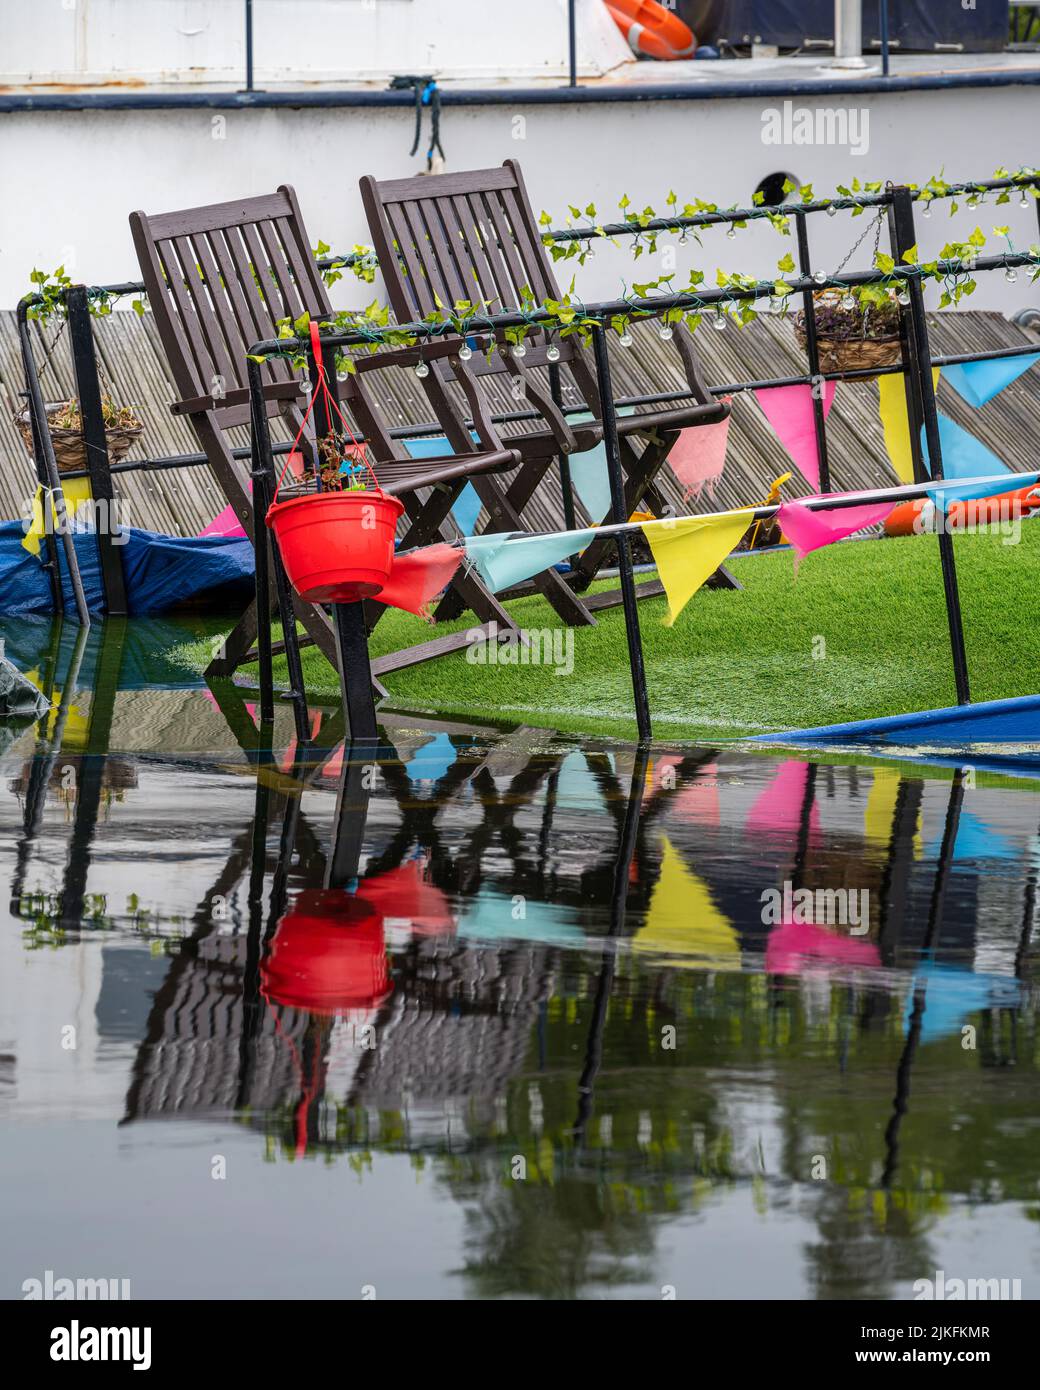 Neatly arranged deckchairs and bunting on a slowly sinking boat on the canal Stock Photo